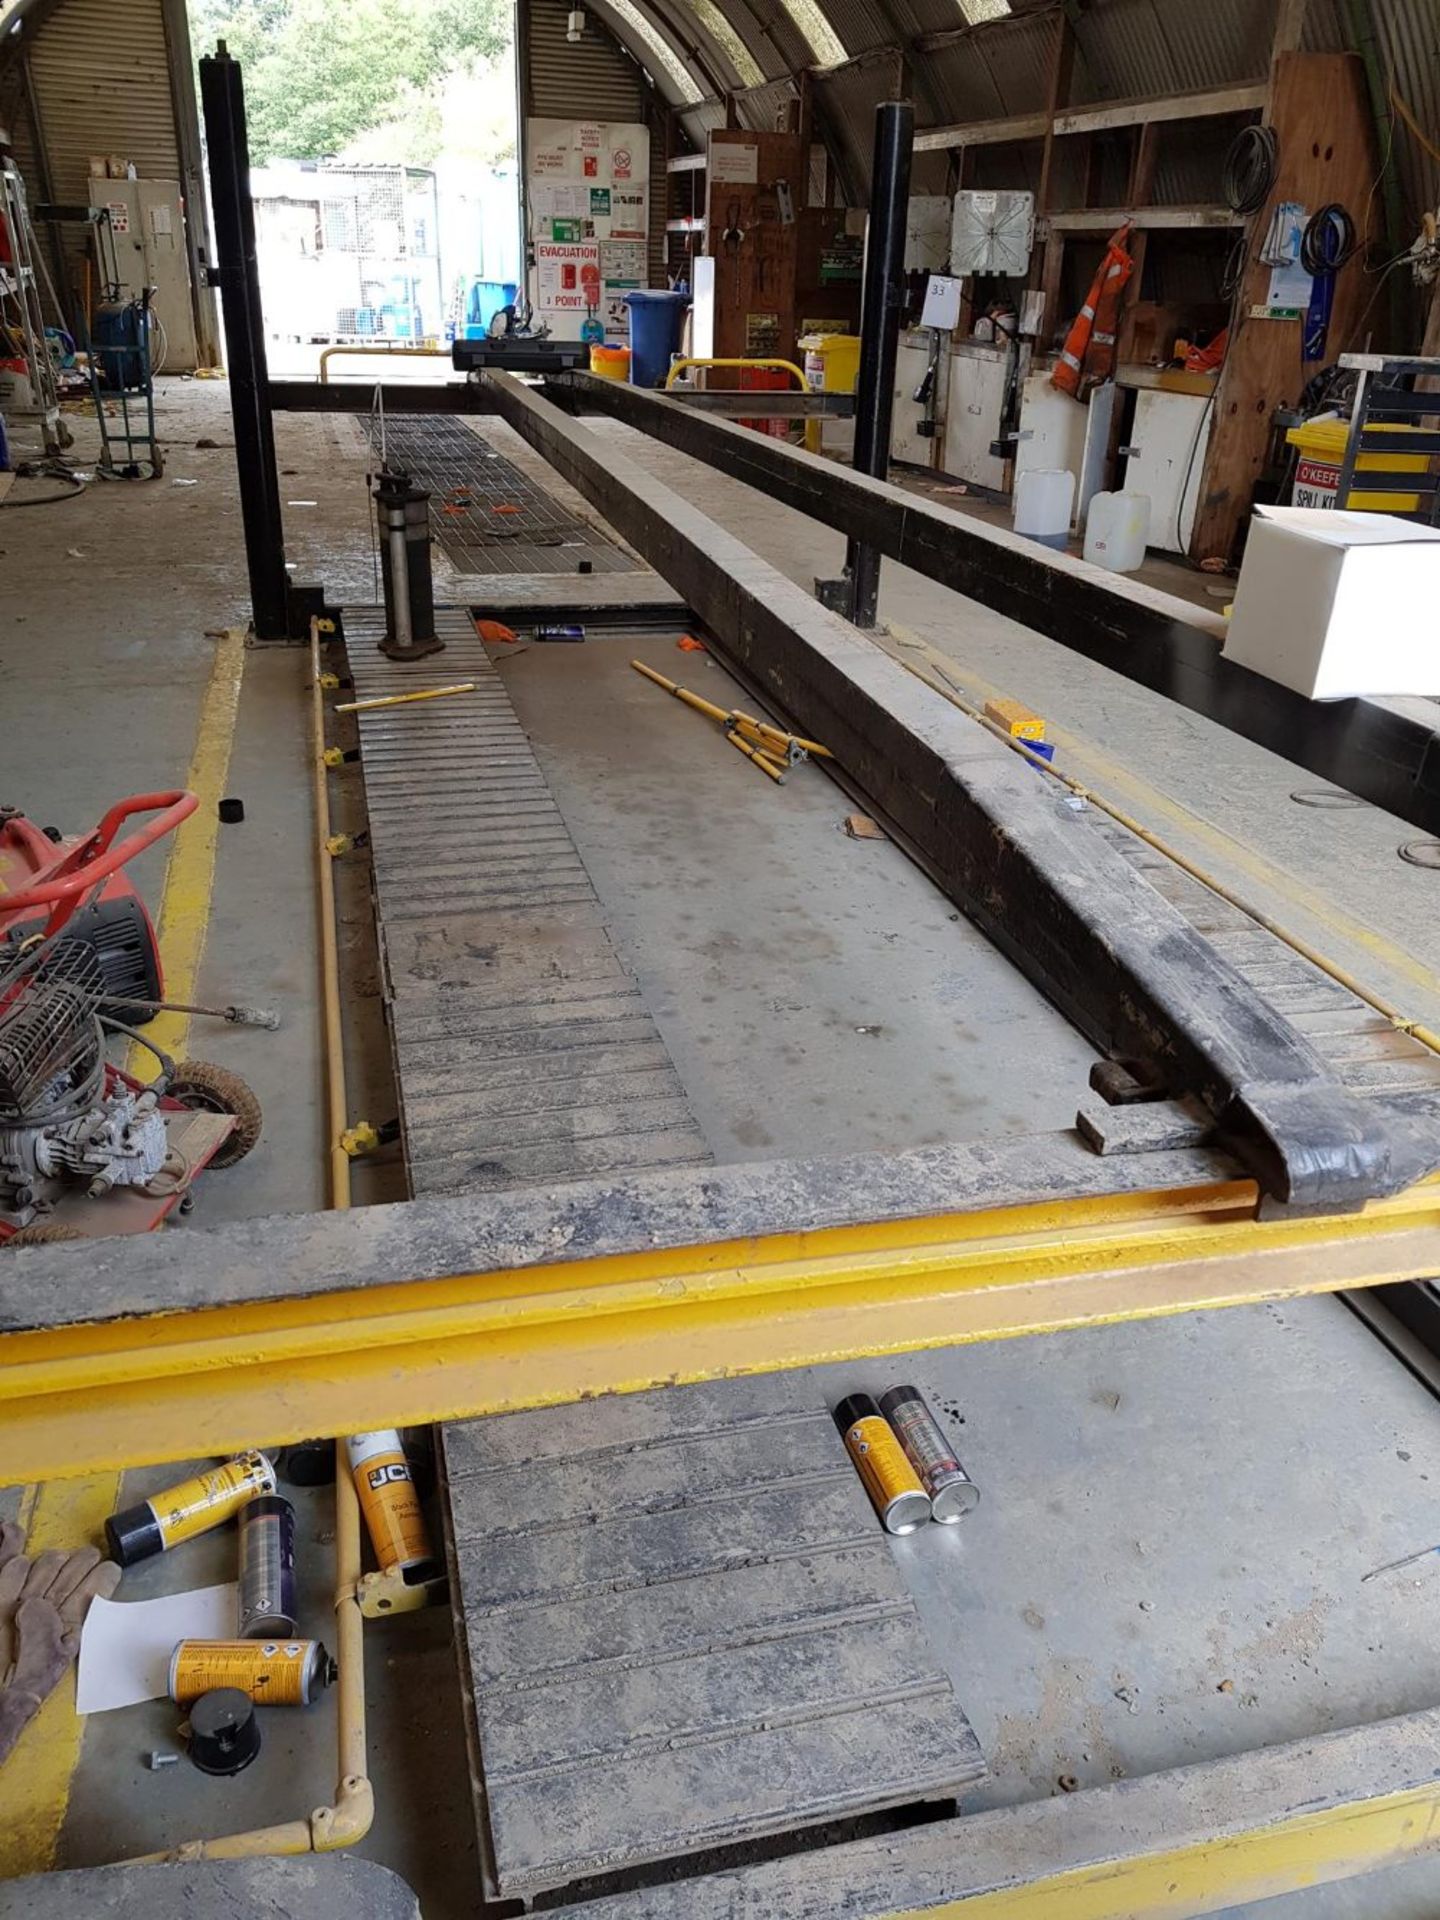 Bradbury 3T Car Lift - 6m long NB: Will be disconnected from the mains supply. Buyer responsible for